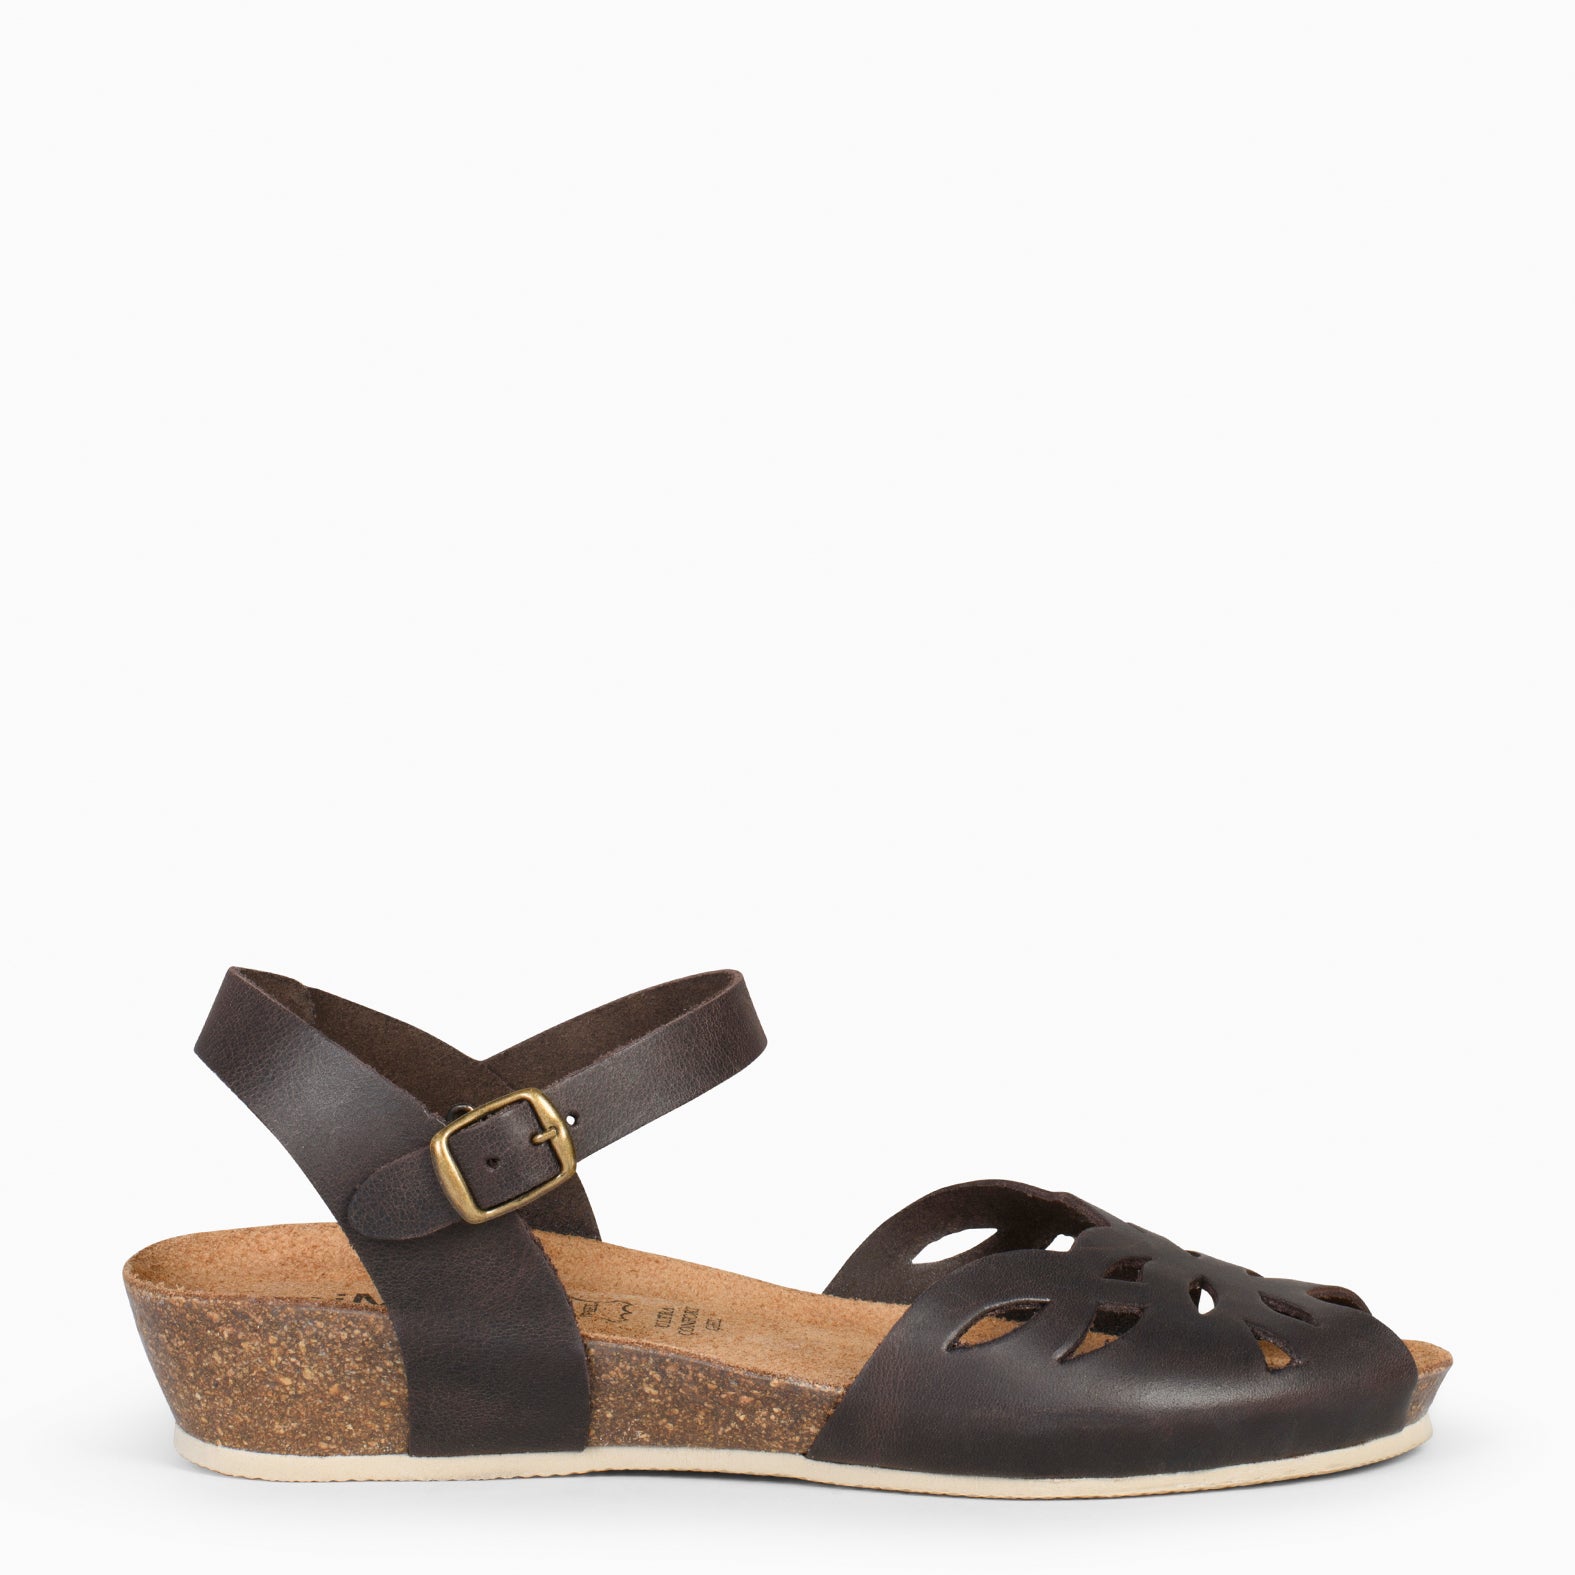 ALOE – BROWN BIO sandals with wedge